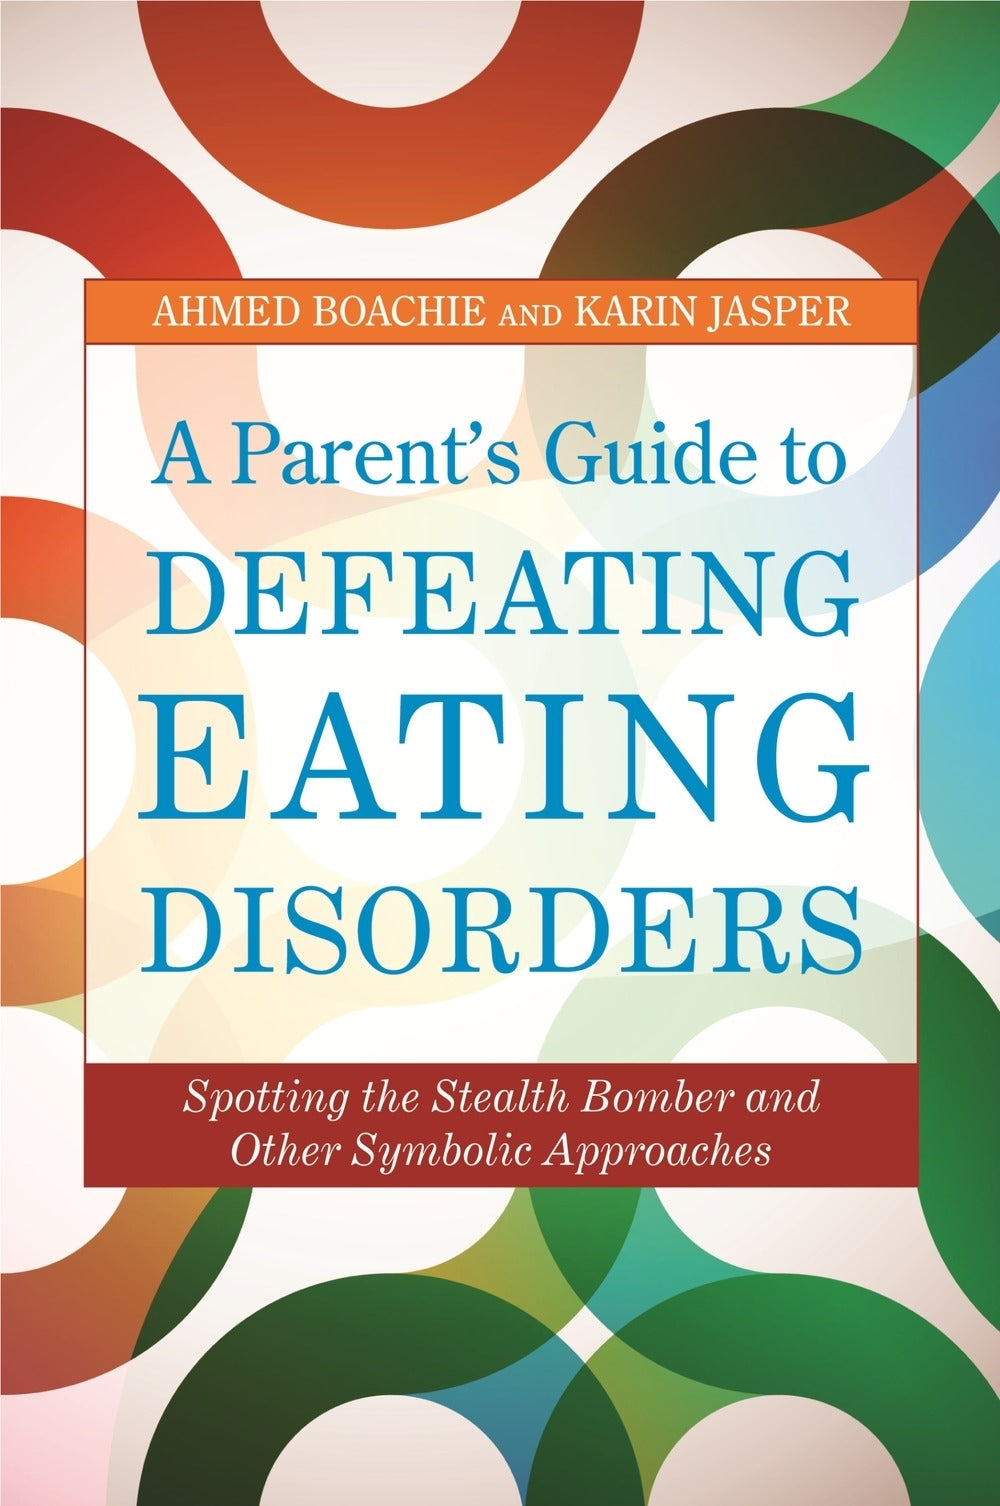 A Parent's Guide to Defeating Eating Disorders by Karin Jasper, Ahmed Boachie, Debra Katzman